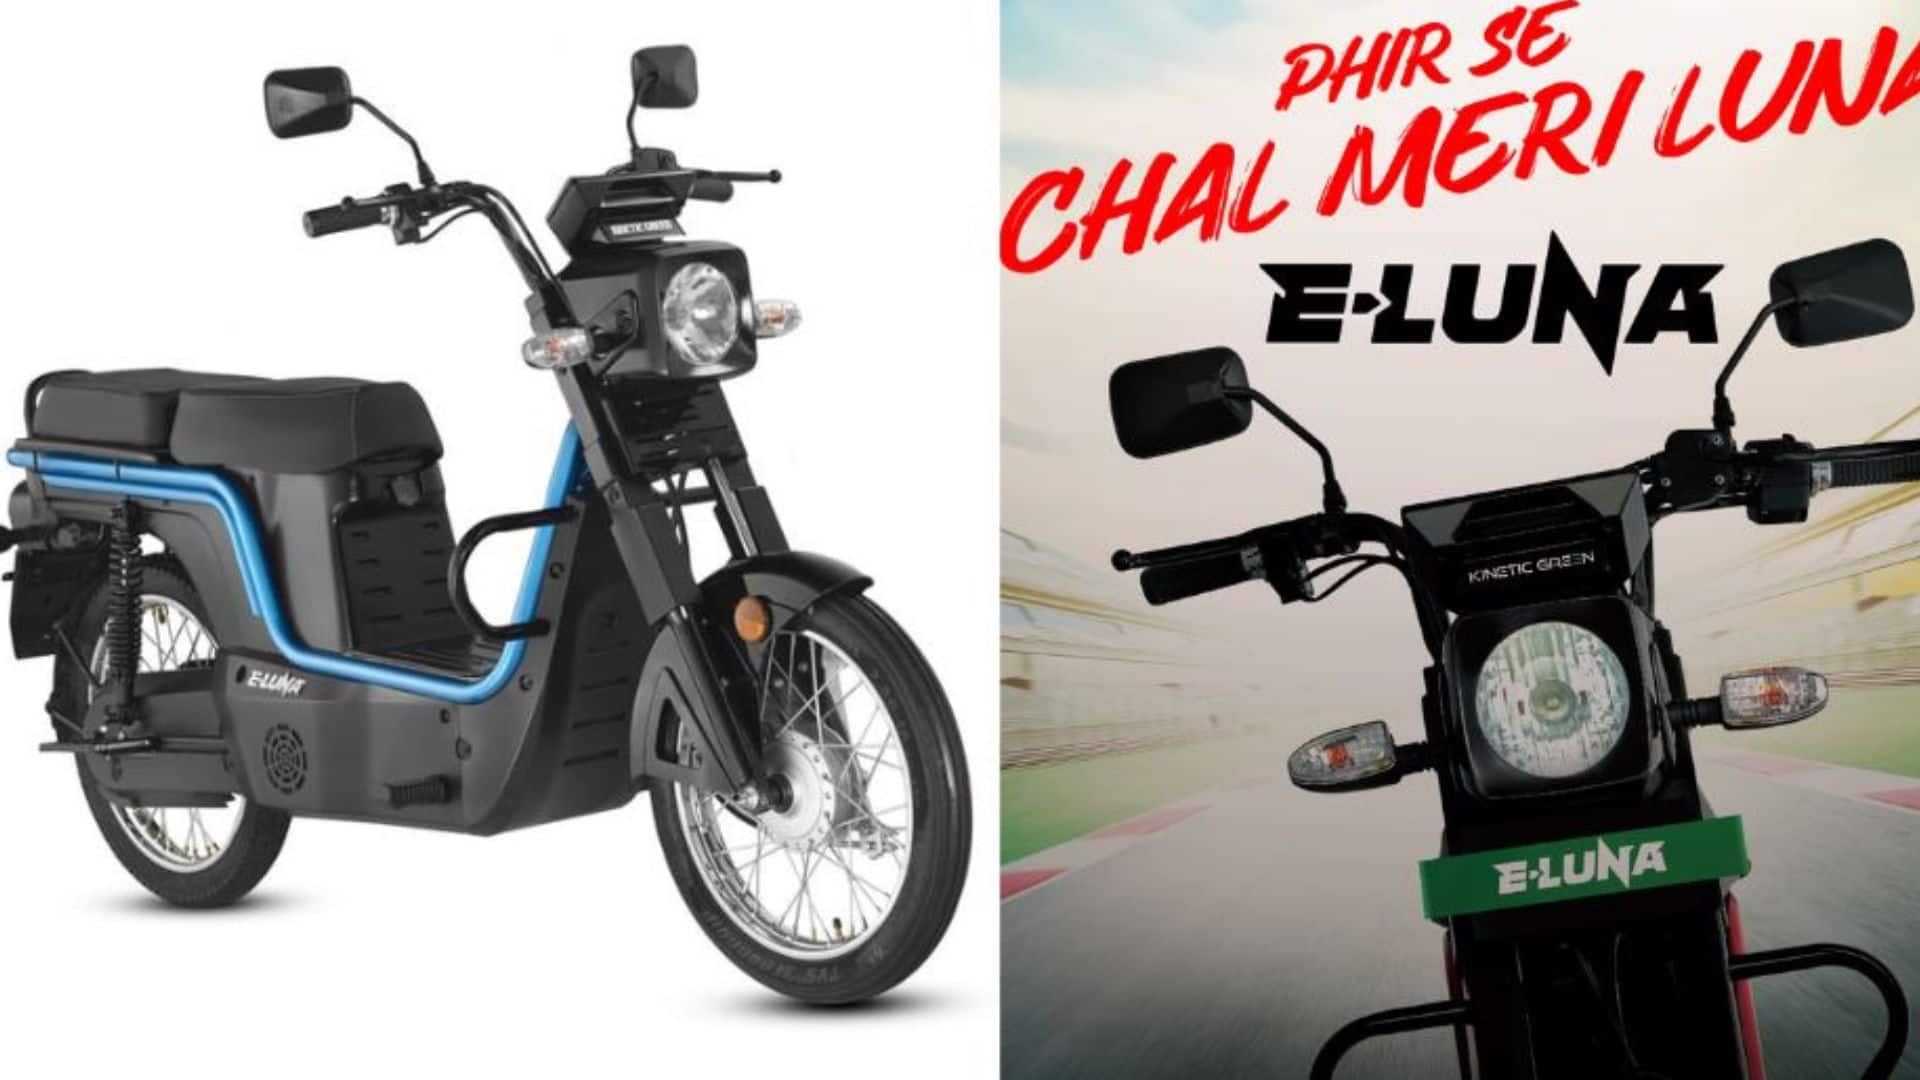 Kinetic Green Zulu Electric Scooter Launched in India - 2YoDoINDIA